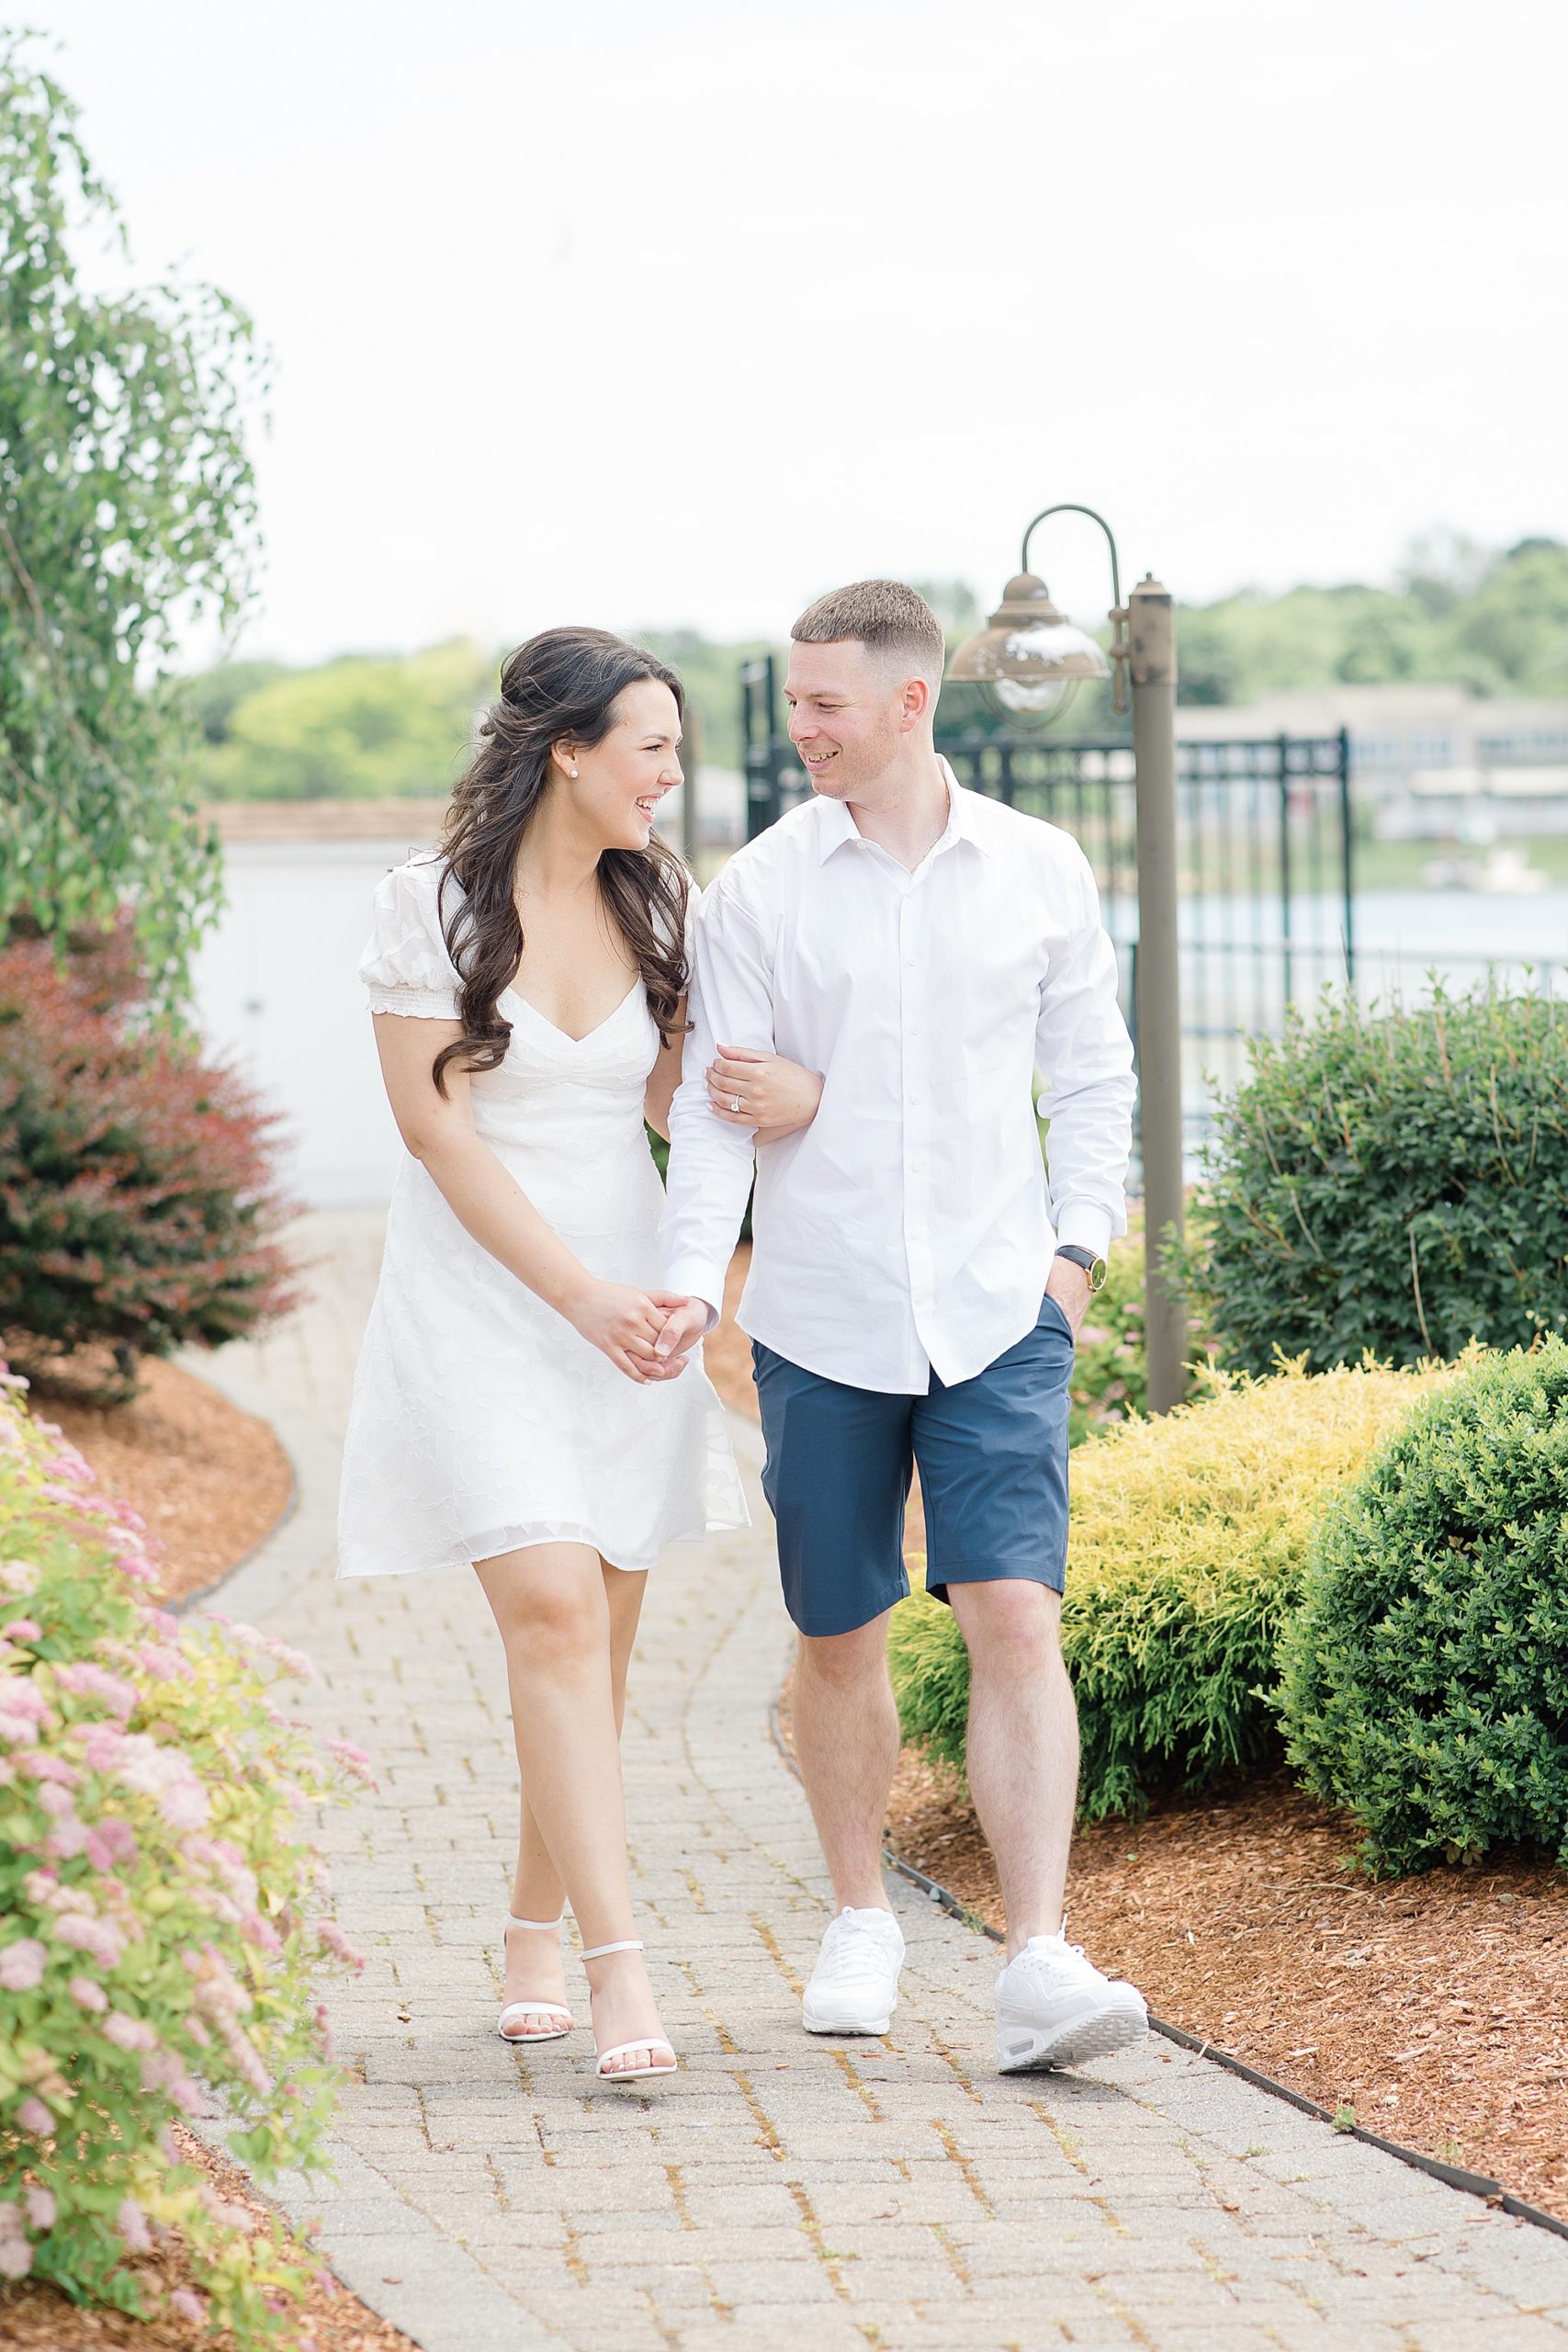 couple walking be the scenic gardens at one of the best wedding venues in Massachusetts, the Danversport